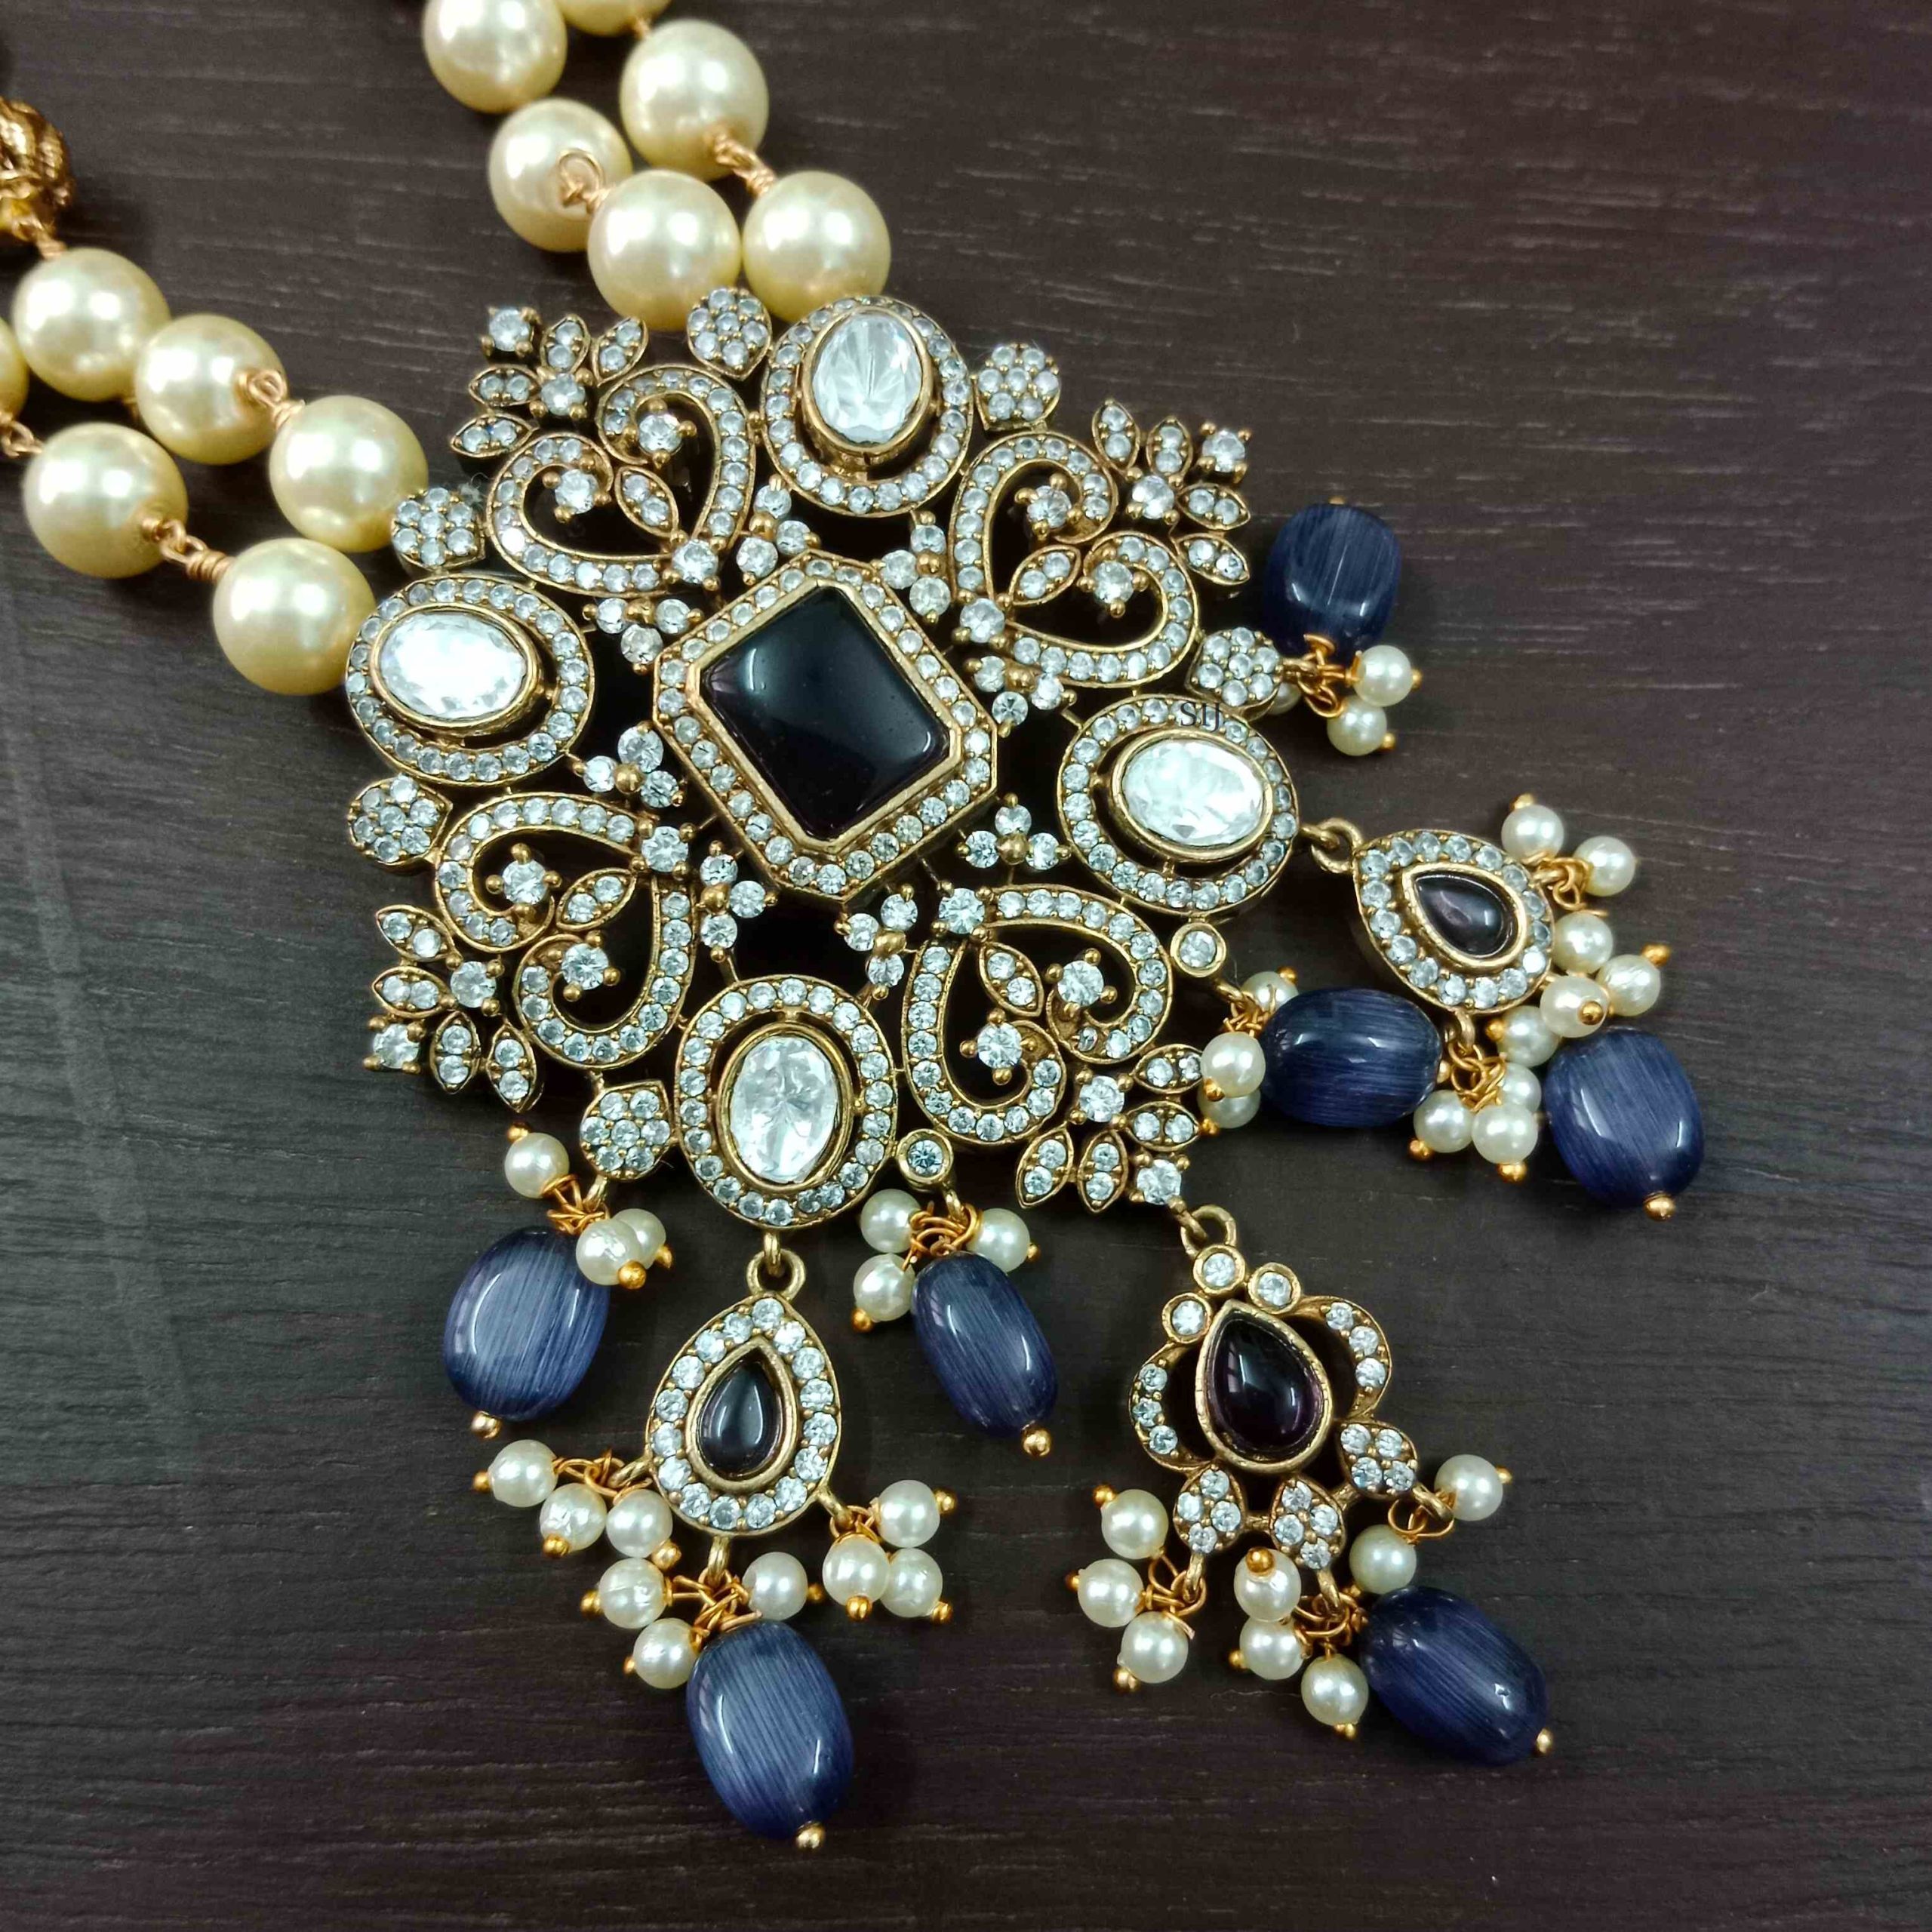 Imitation Two Layers Beads and Pearl Haram with Victorian Pendant